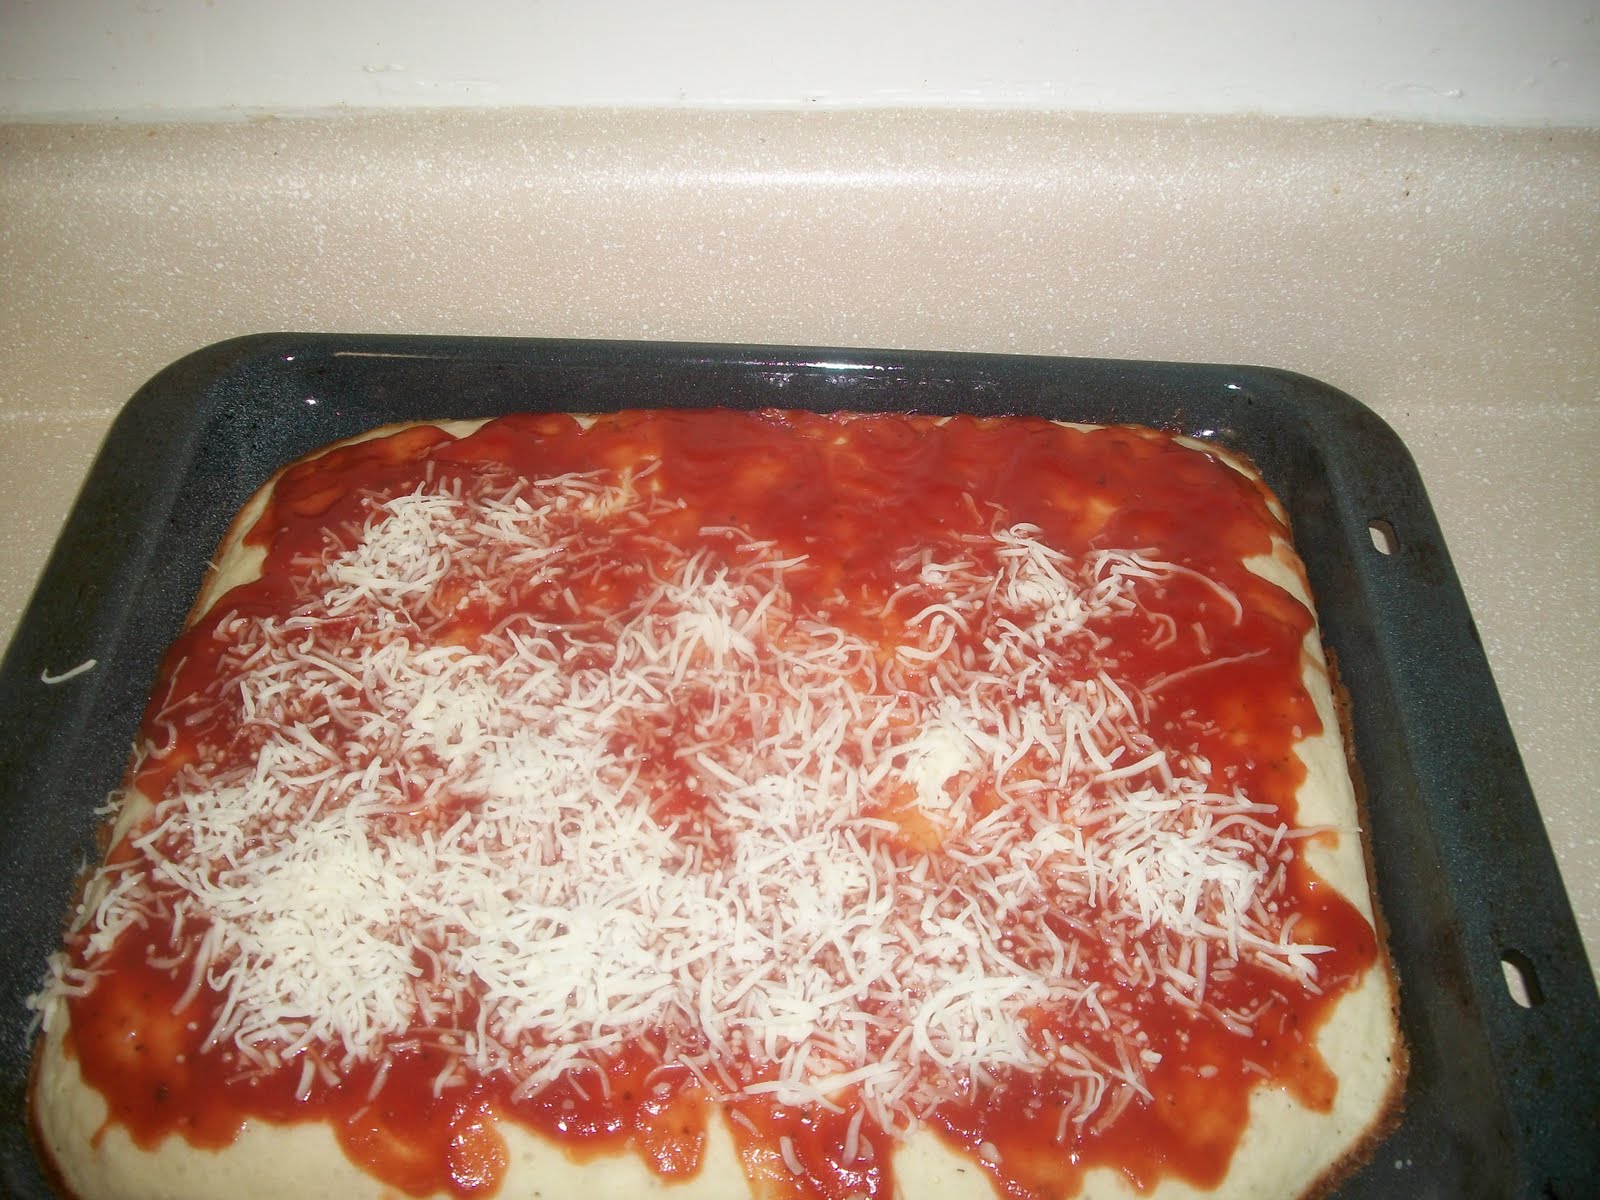 cheese, pepperoni can bag 1 of tomato 8oz. sauce, 1 to without home bag  at of pancakes make Italian how   oven